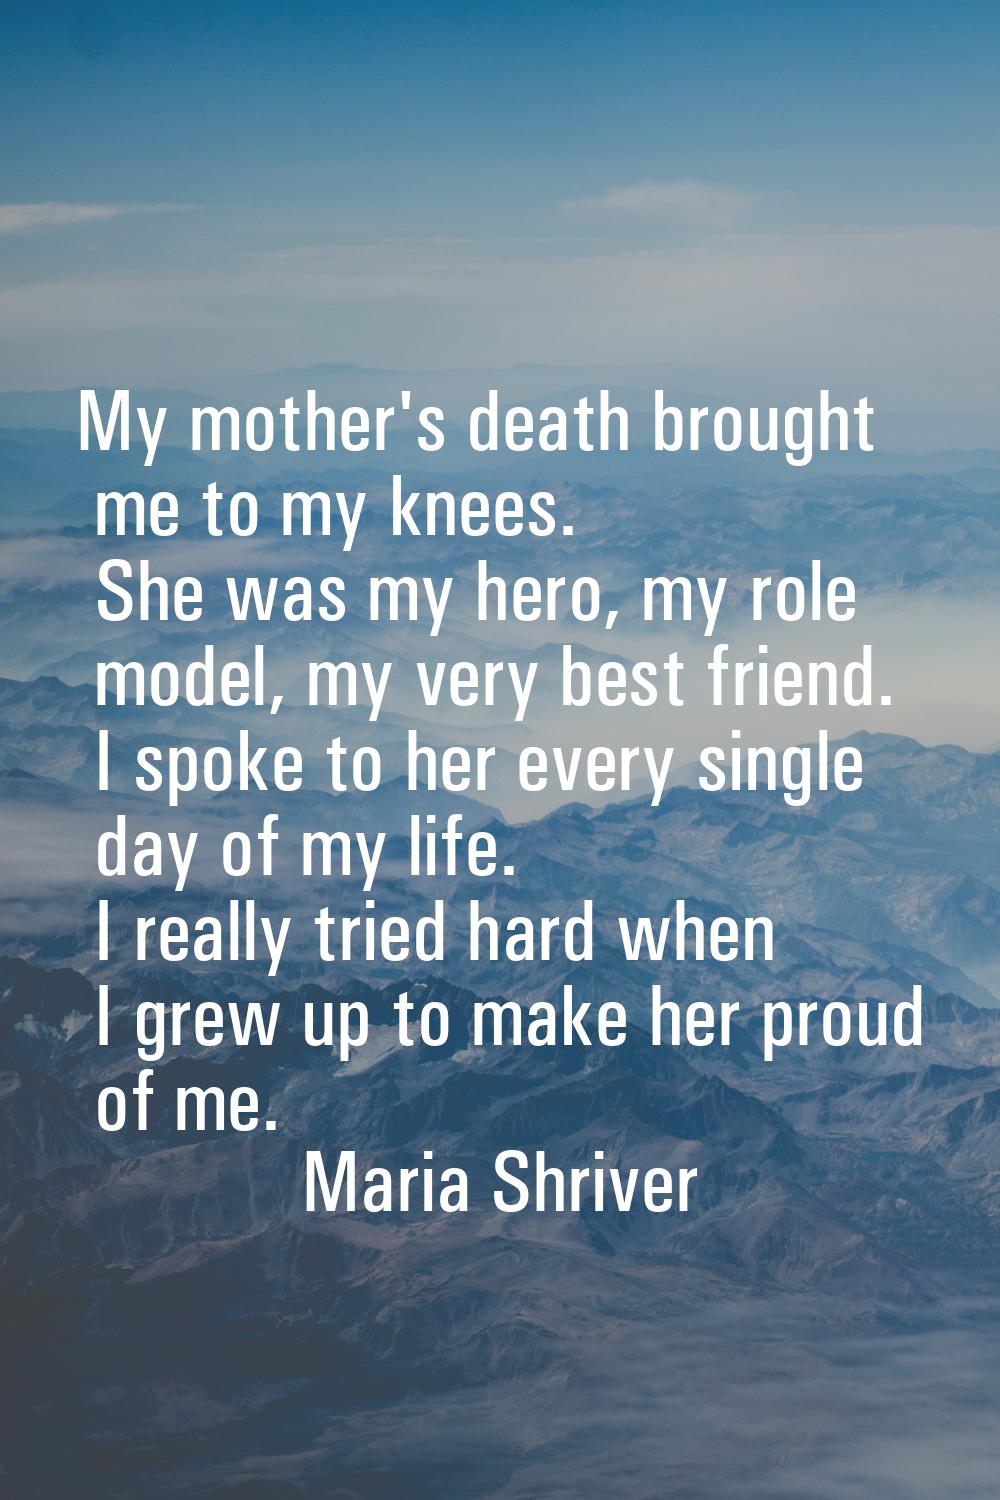 My mother's death brought me to my knees. She was my hero, my role model, my very best friend. I sp